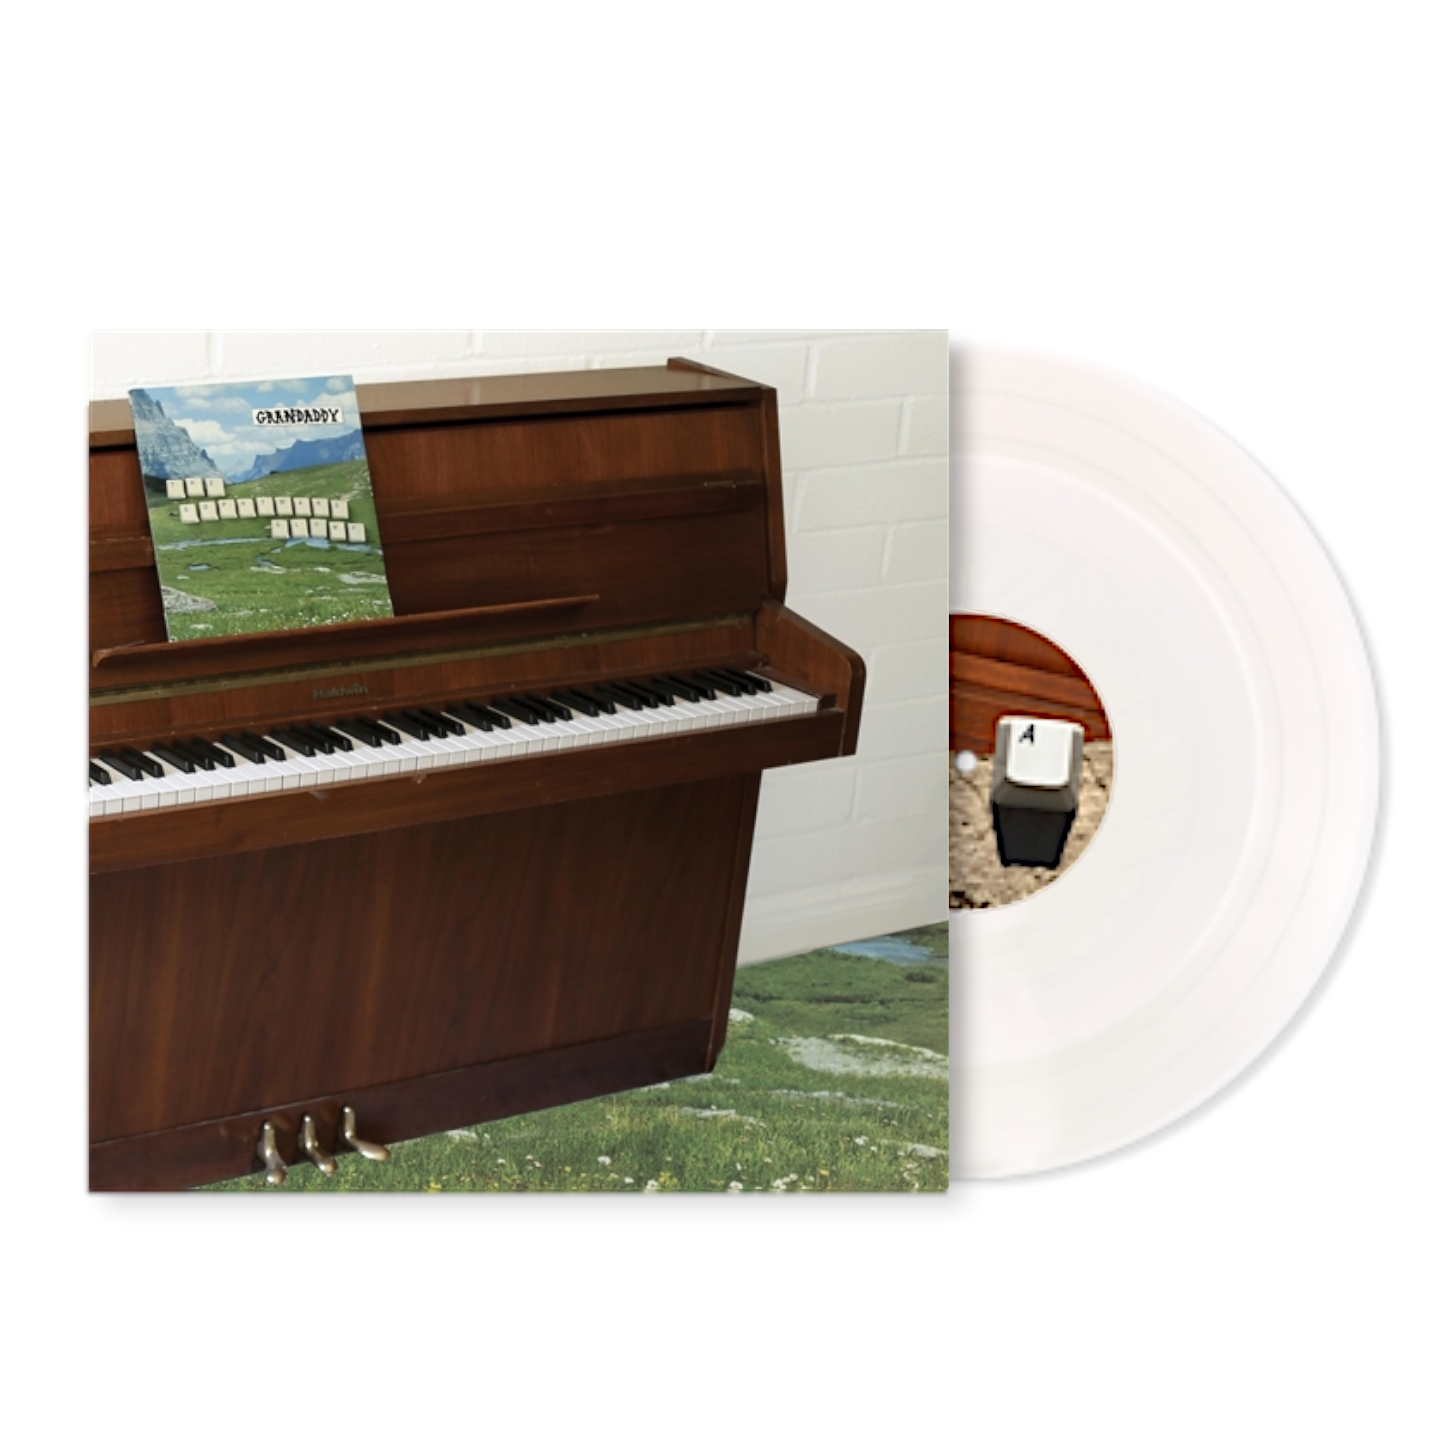 THE SOPHTWARE SLUMP ON A WOODEN PIANO [INDIE EXCL. CLOUDY CLEAR VINYL]